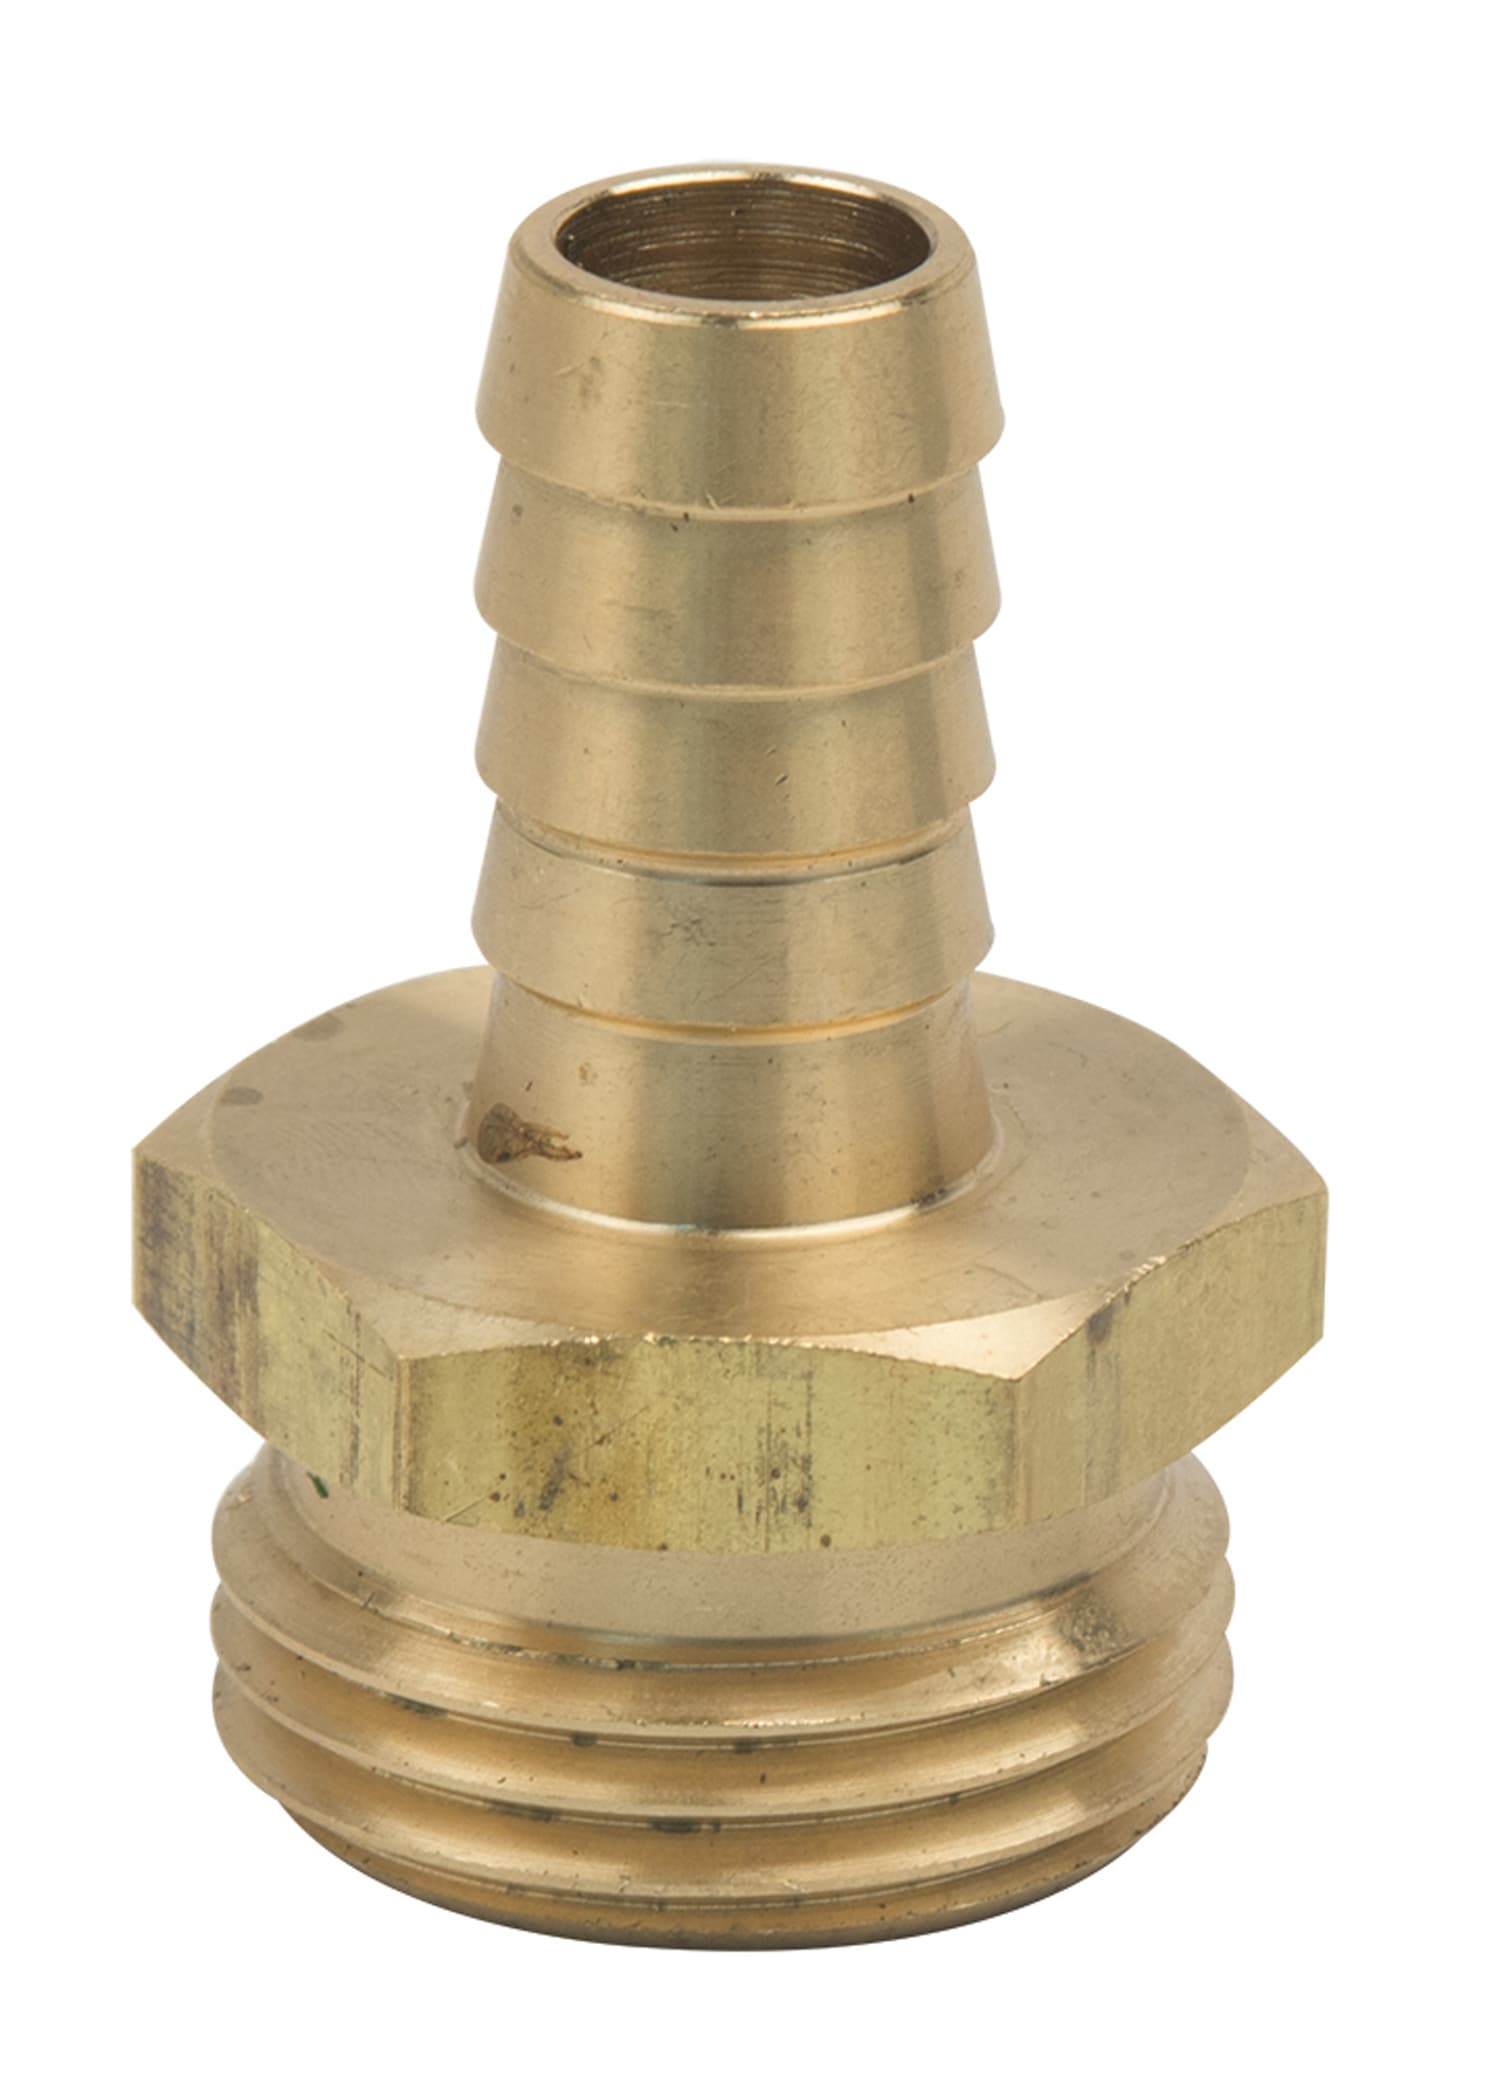 1/4 MPT x 1/4 BARB ADAPTER 3pack BRASS, 